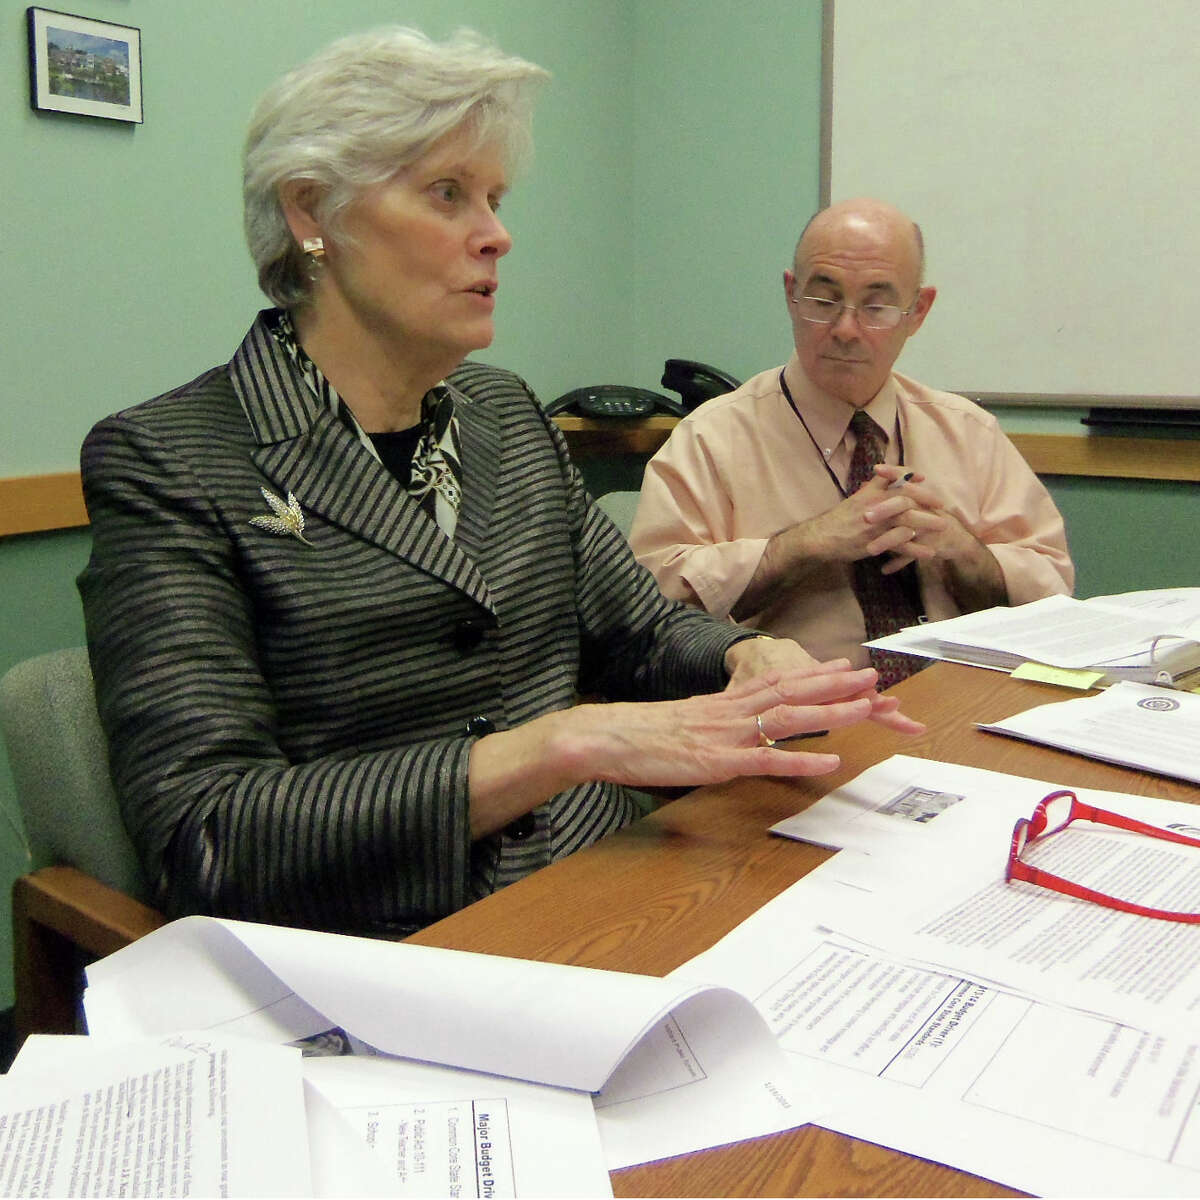 Milford Supt. of Schools Elizabeth Feser, flanked by school system CEO James L. Richetelli Jr., reviews her proposed $88.9 million 2013-14 budget with members of the press this week. Her budget would eliminate 10 teaching positions because of declining enrollment, but it also adds positions needed to keep pace with new state regulations on teacher reviews.